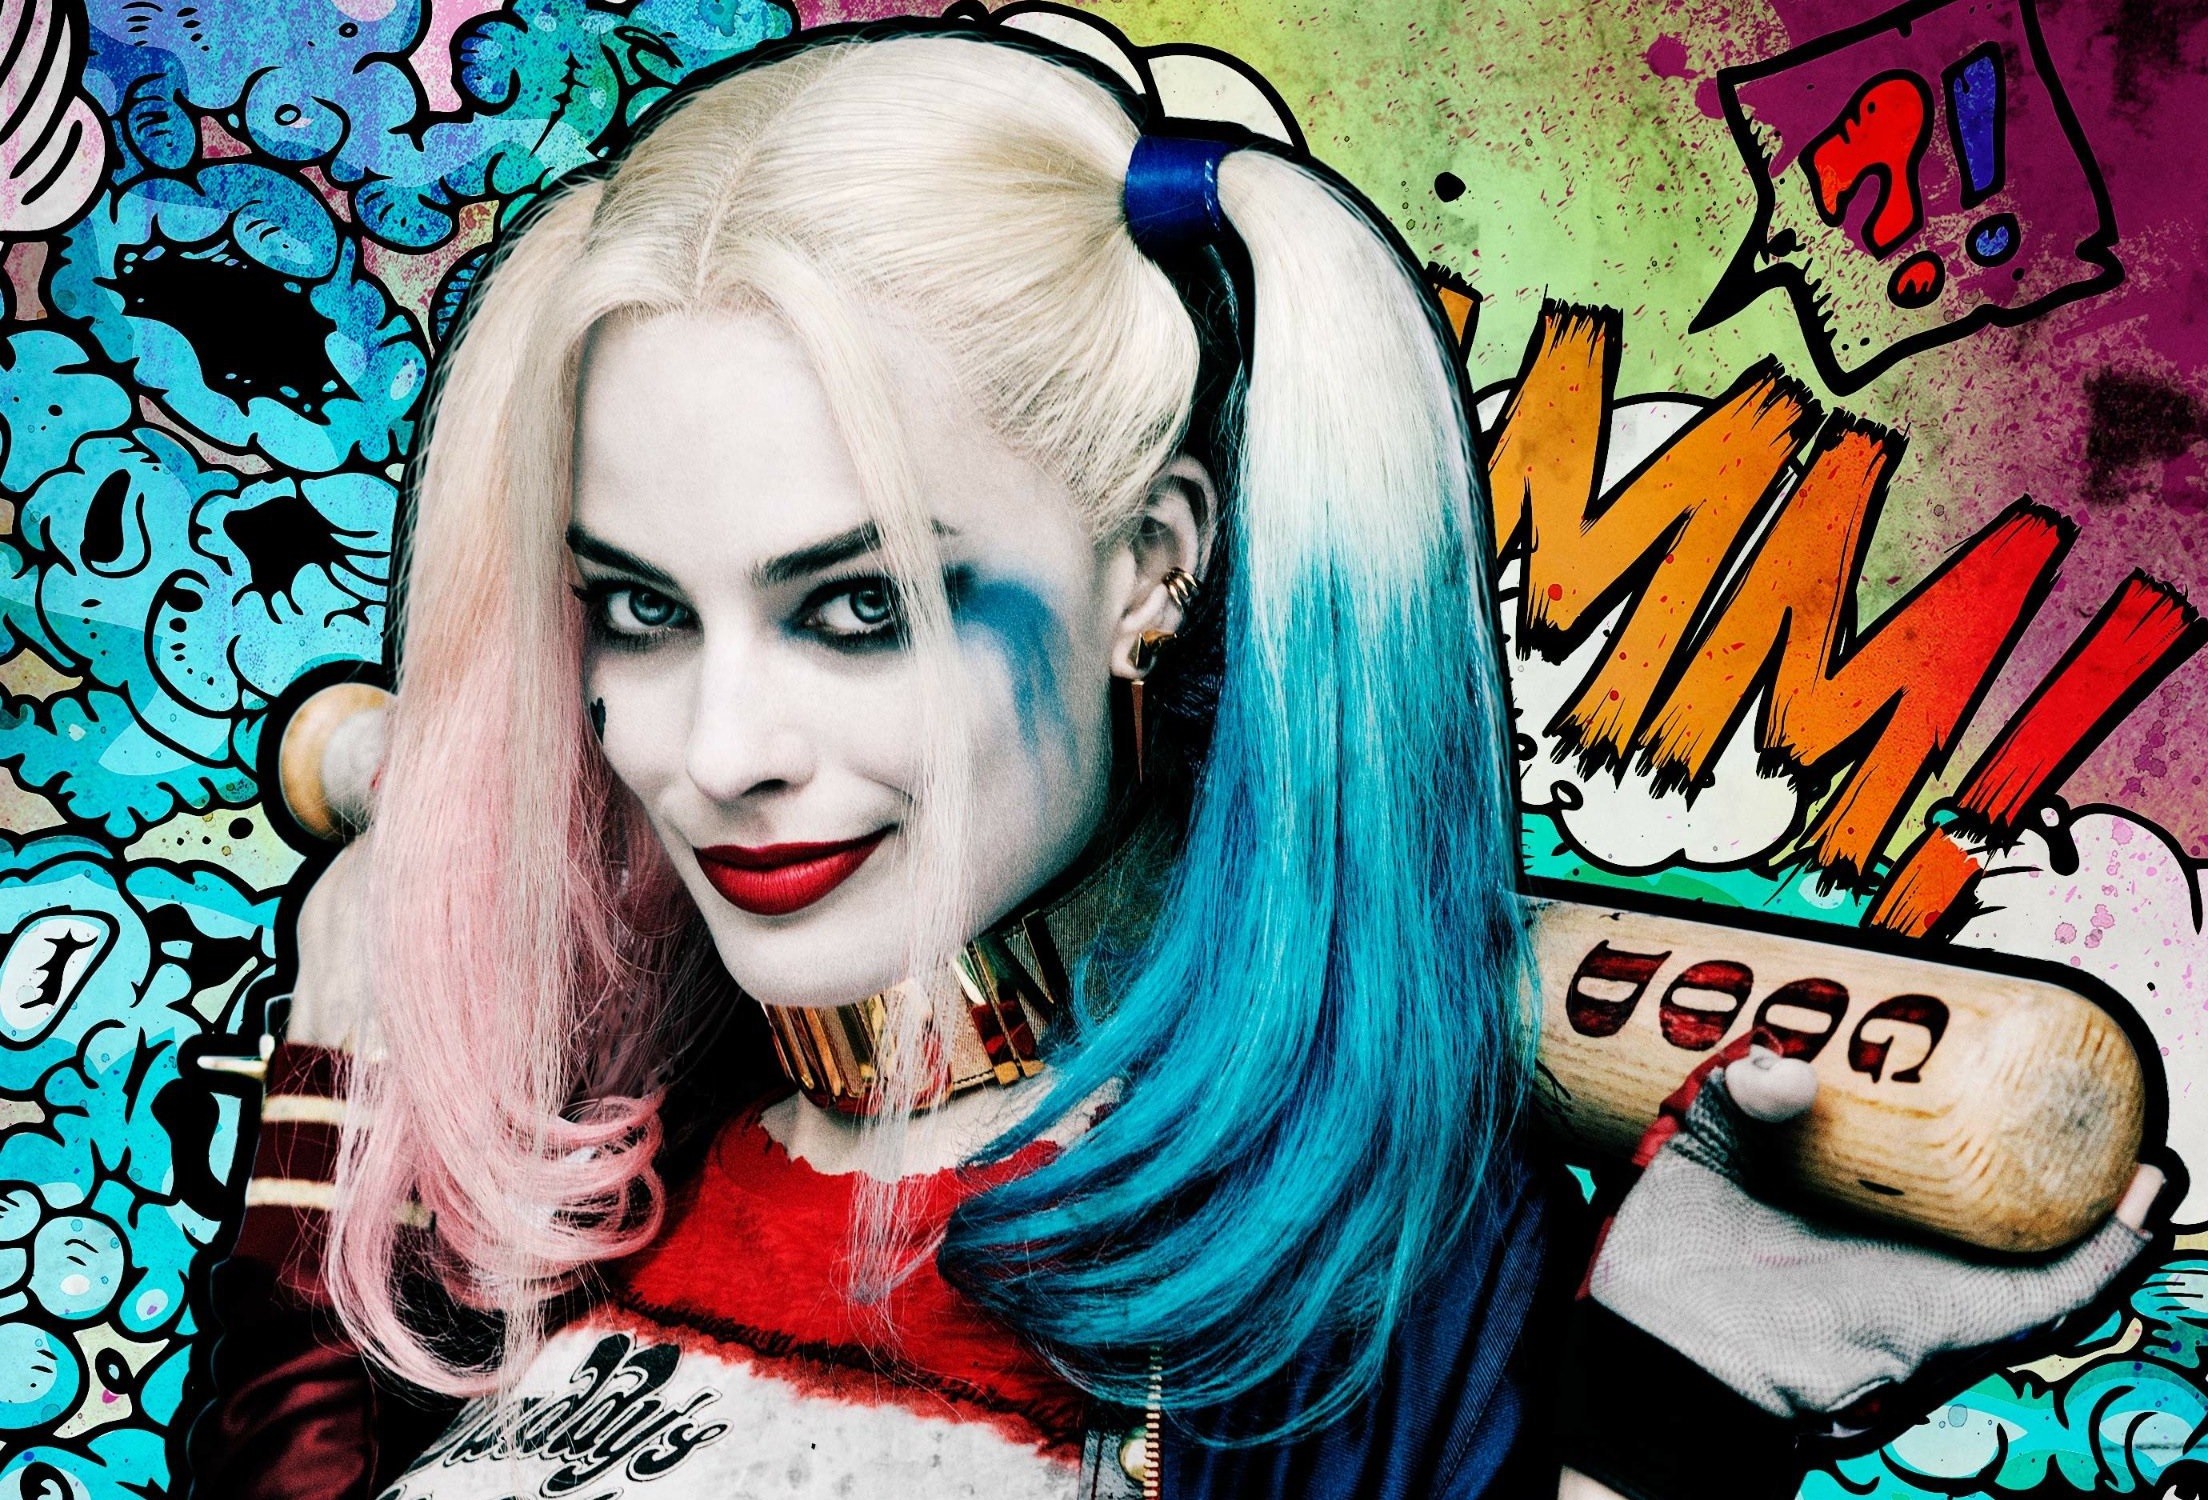 Margot Robbie Harley Quinn wallpaper ·① Download free cool backgrounds